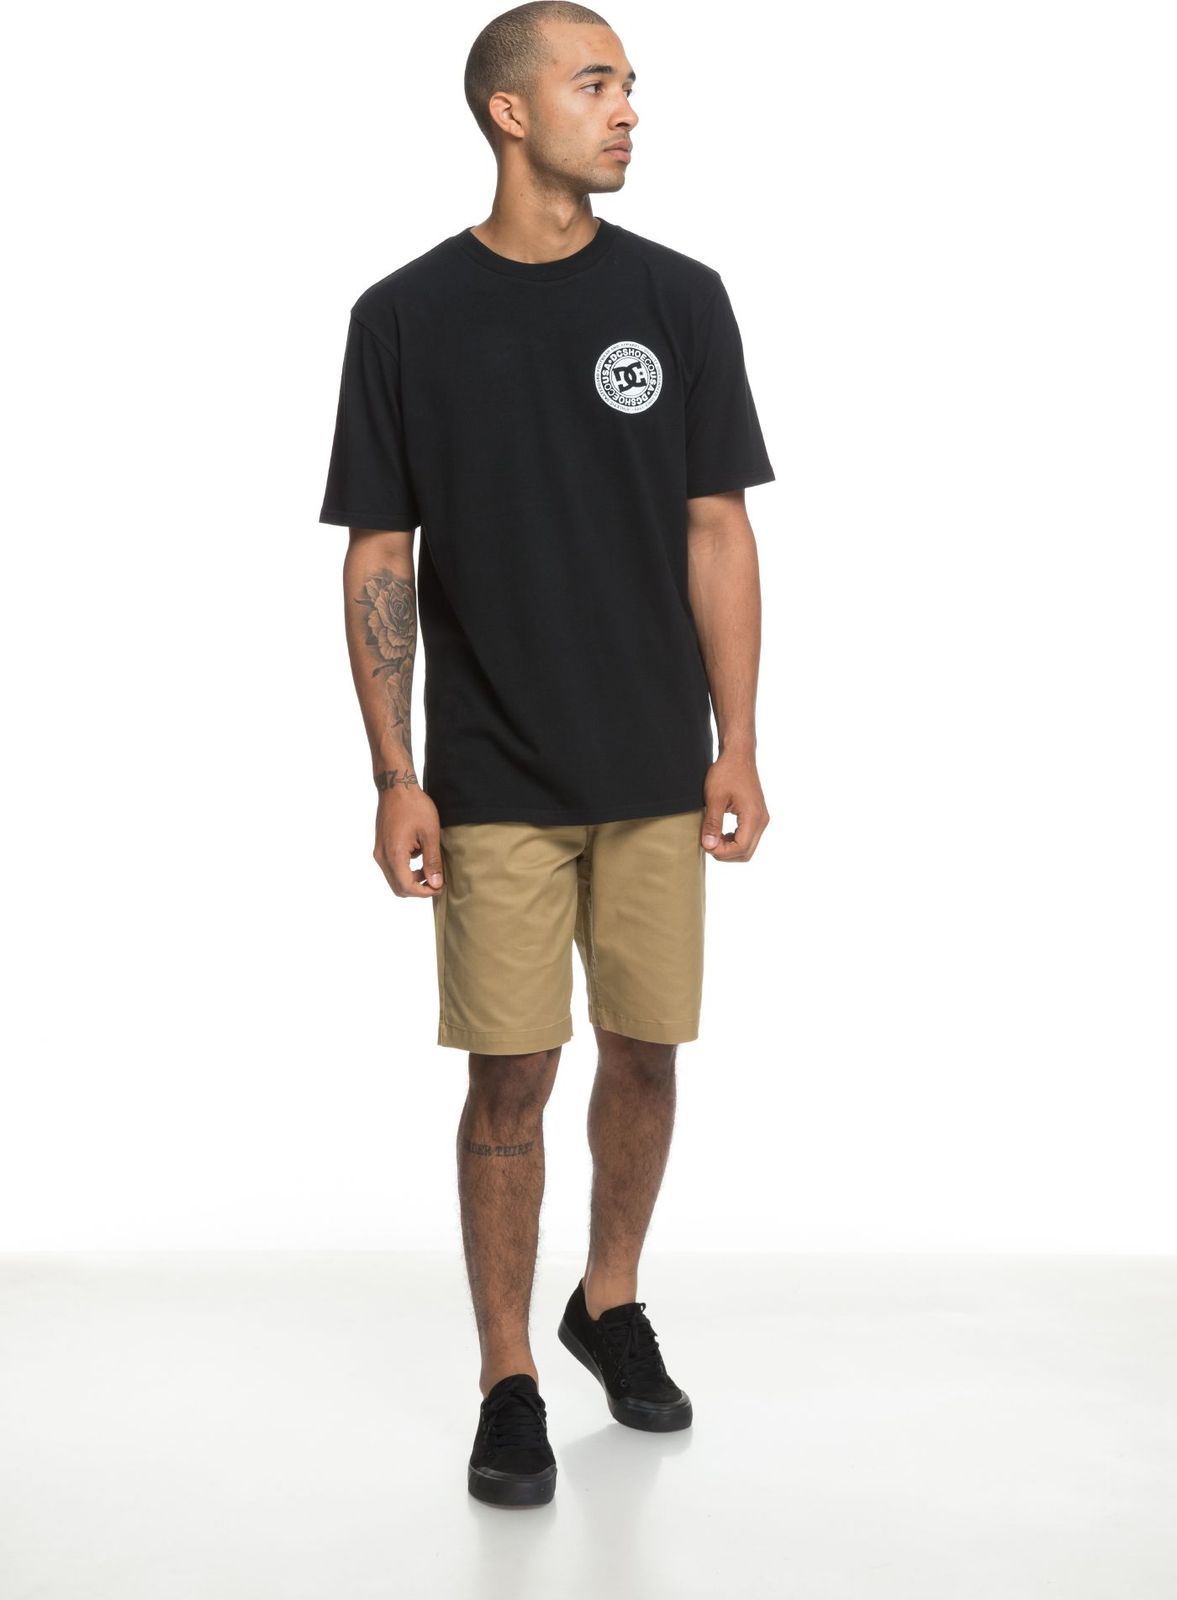   DC Shoes Worker Straight, : . EDYWS03111-CLM0.  36 (52)